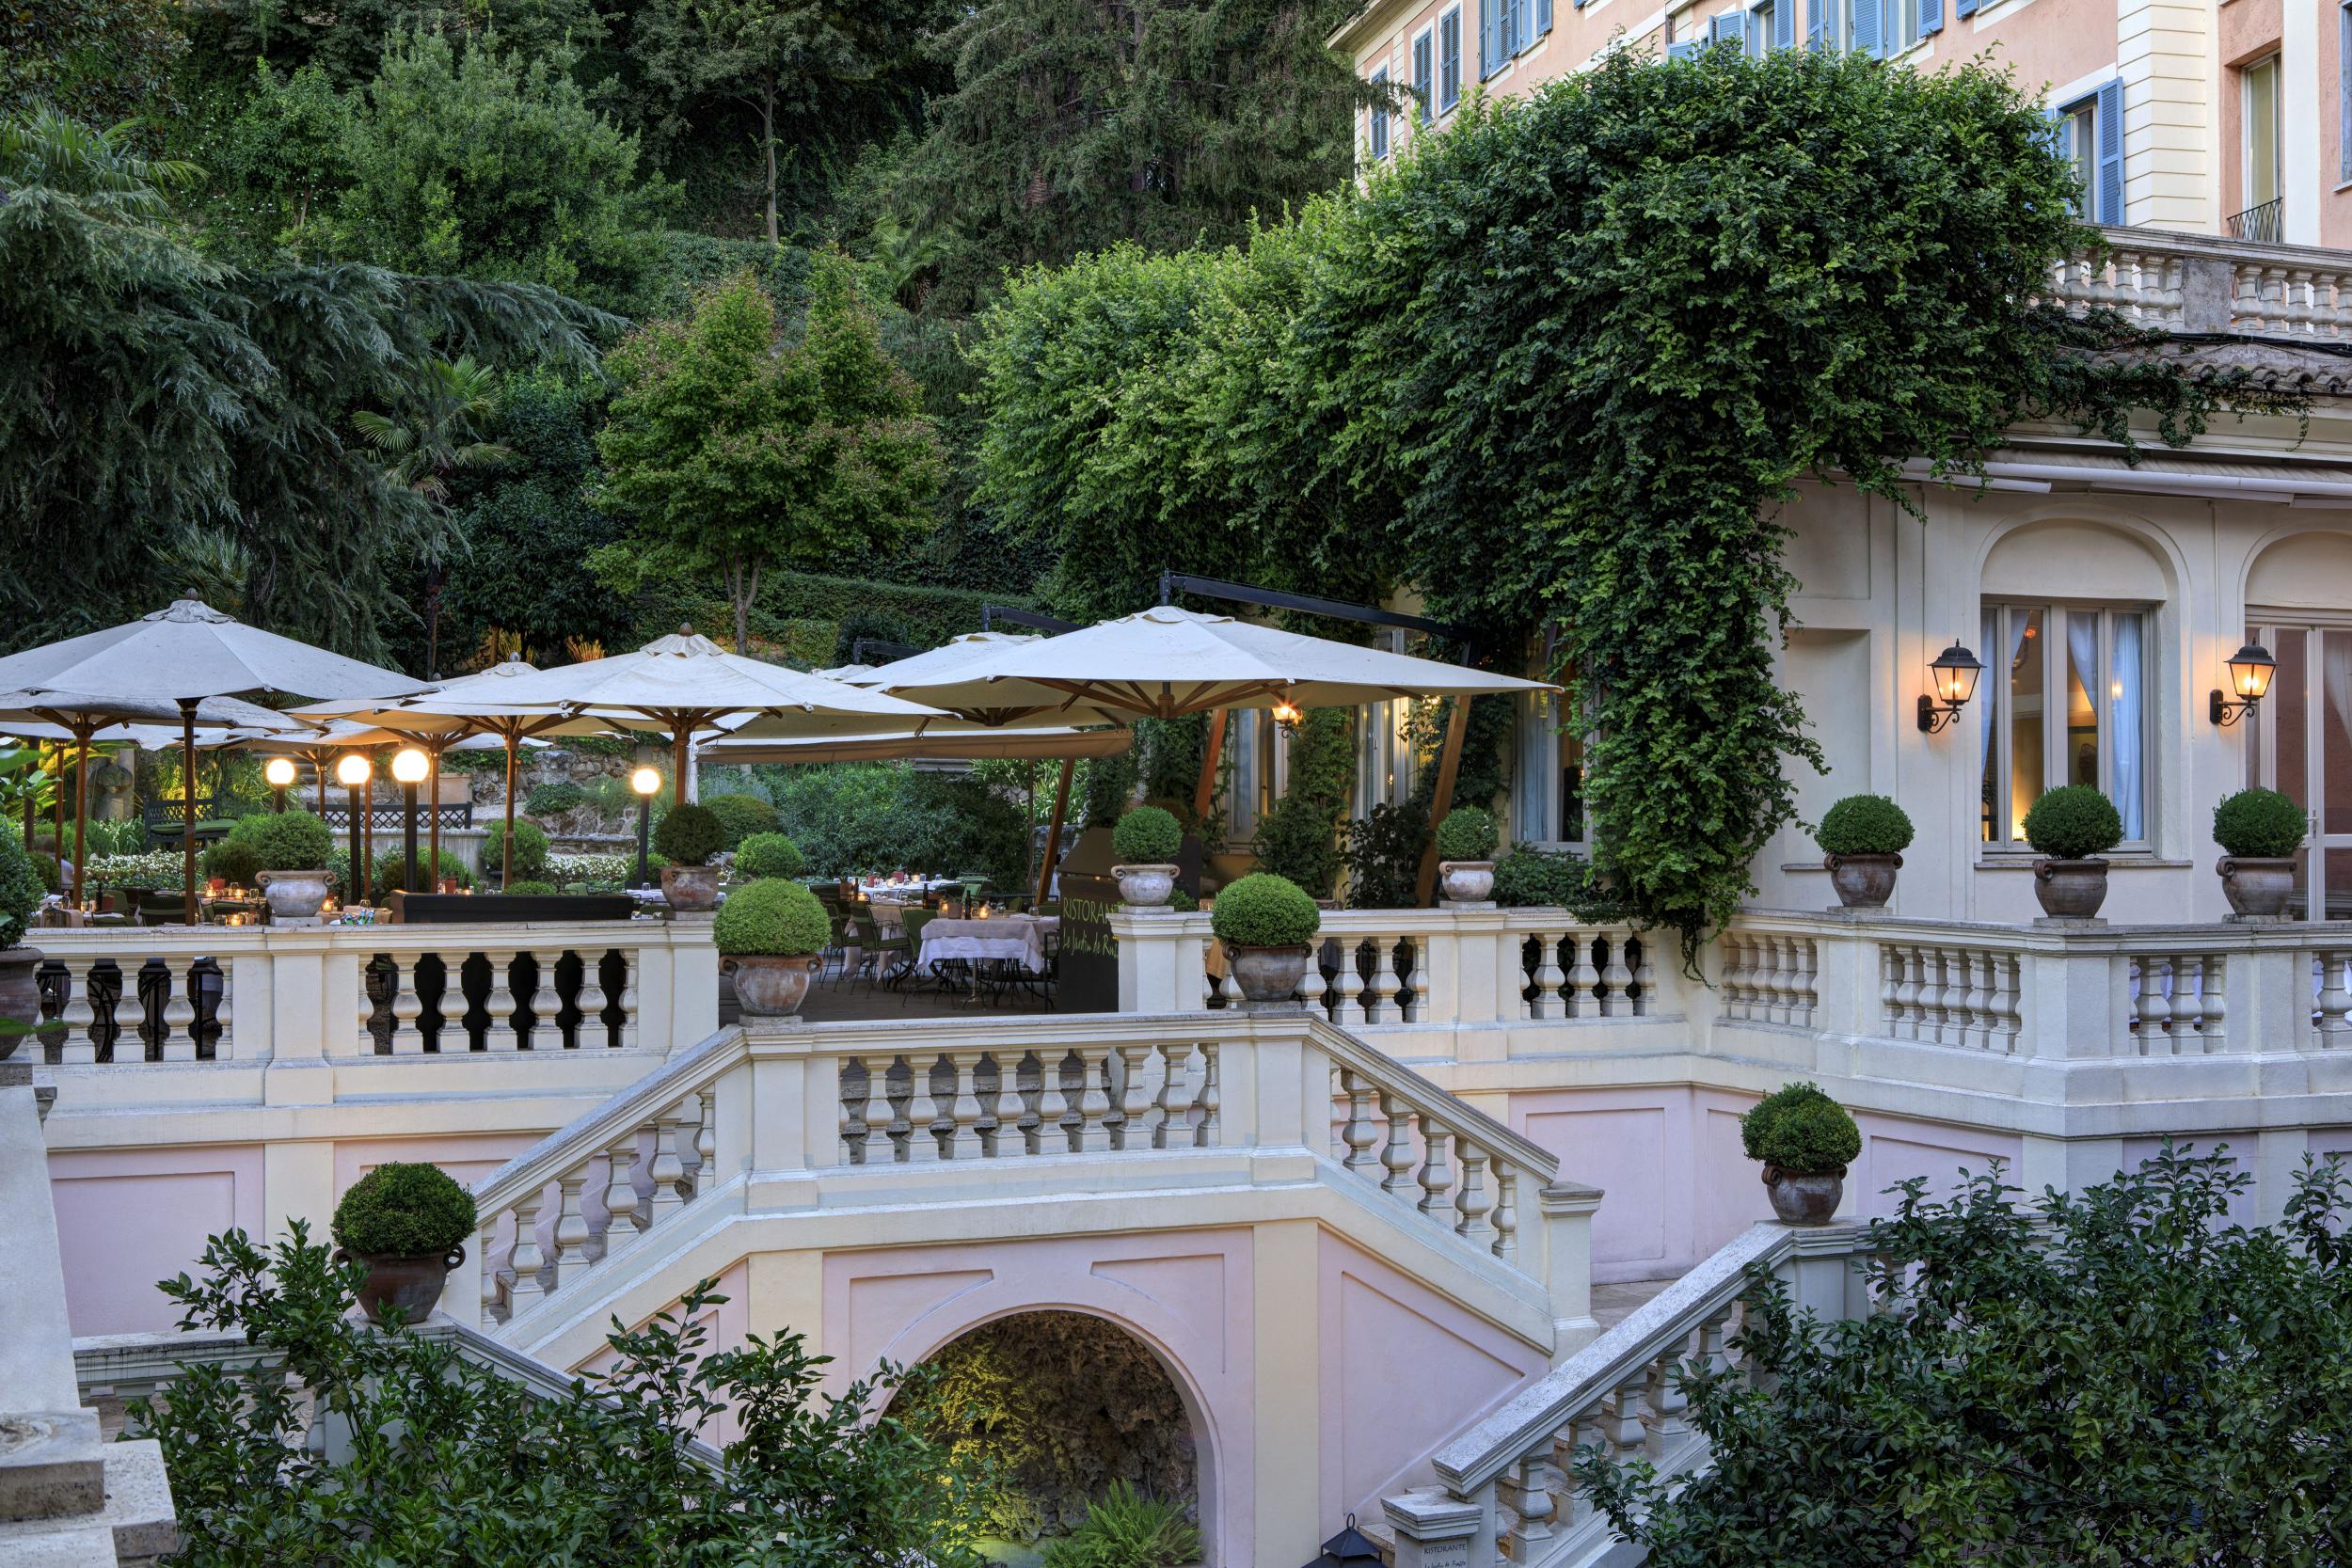 Hotel de Russie's secluded garden is the perfect place to escape the busy city streets